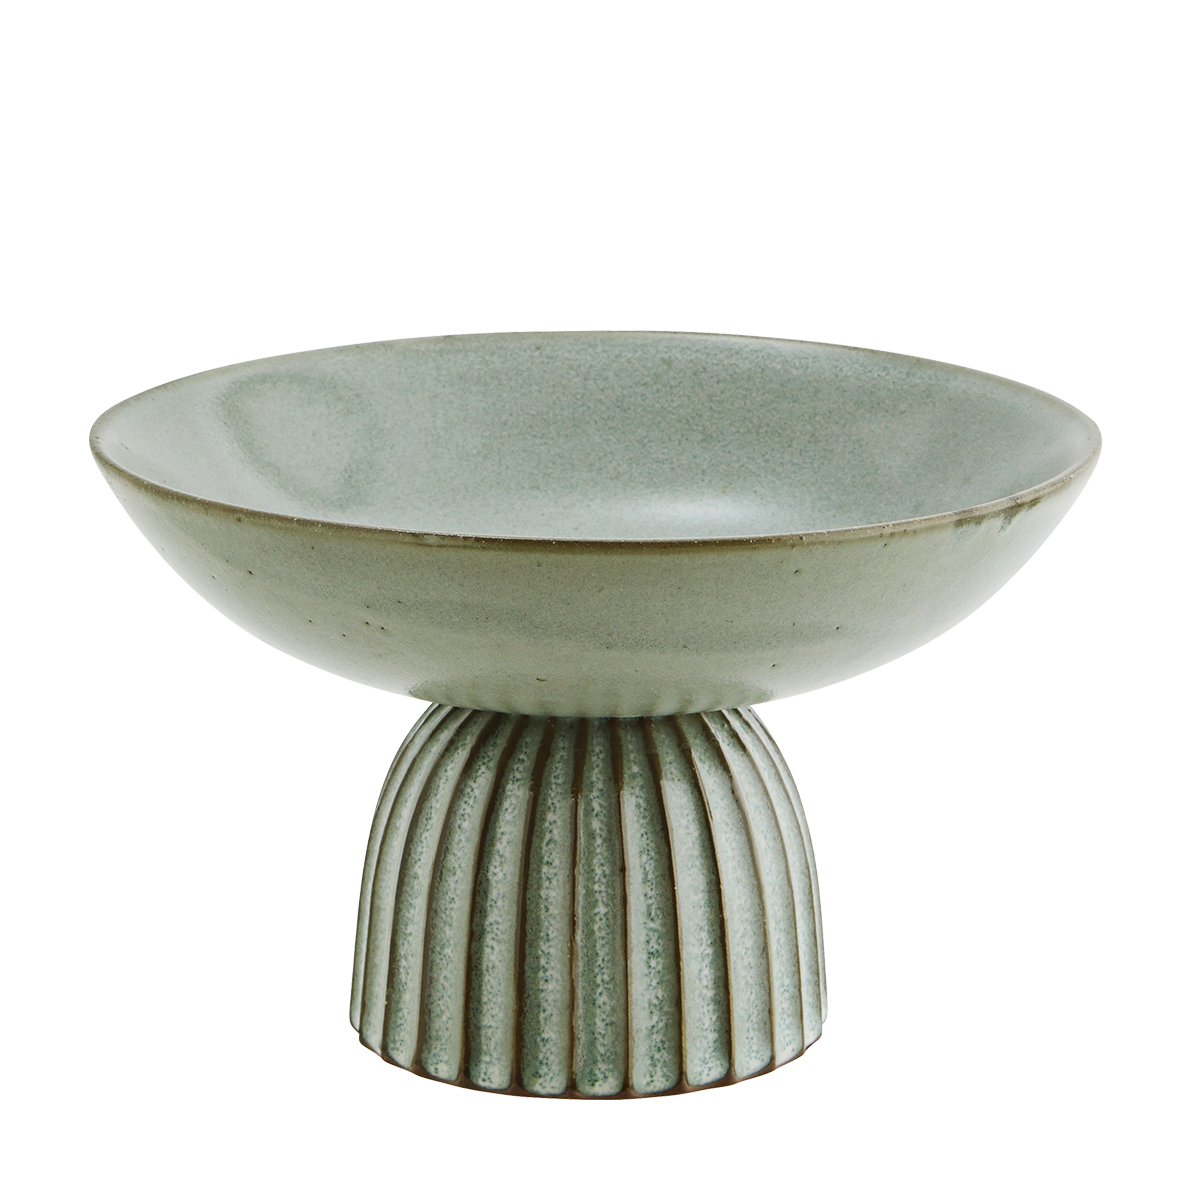 Stoneware bowl on stand